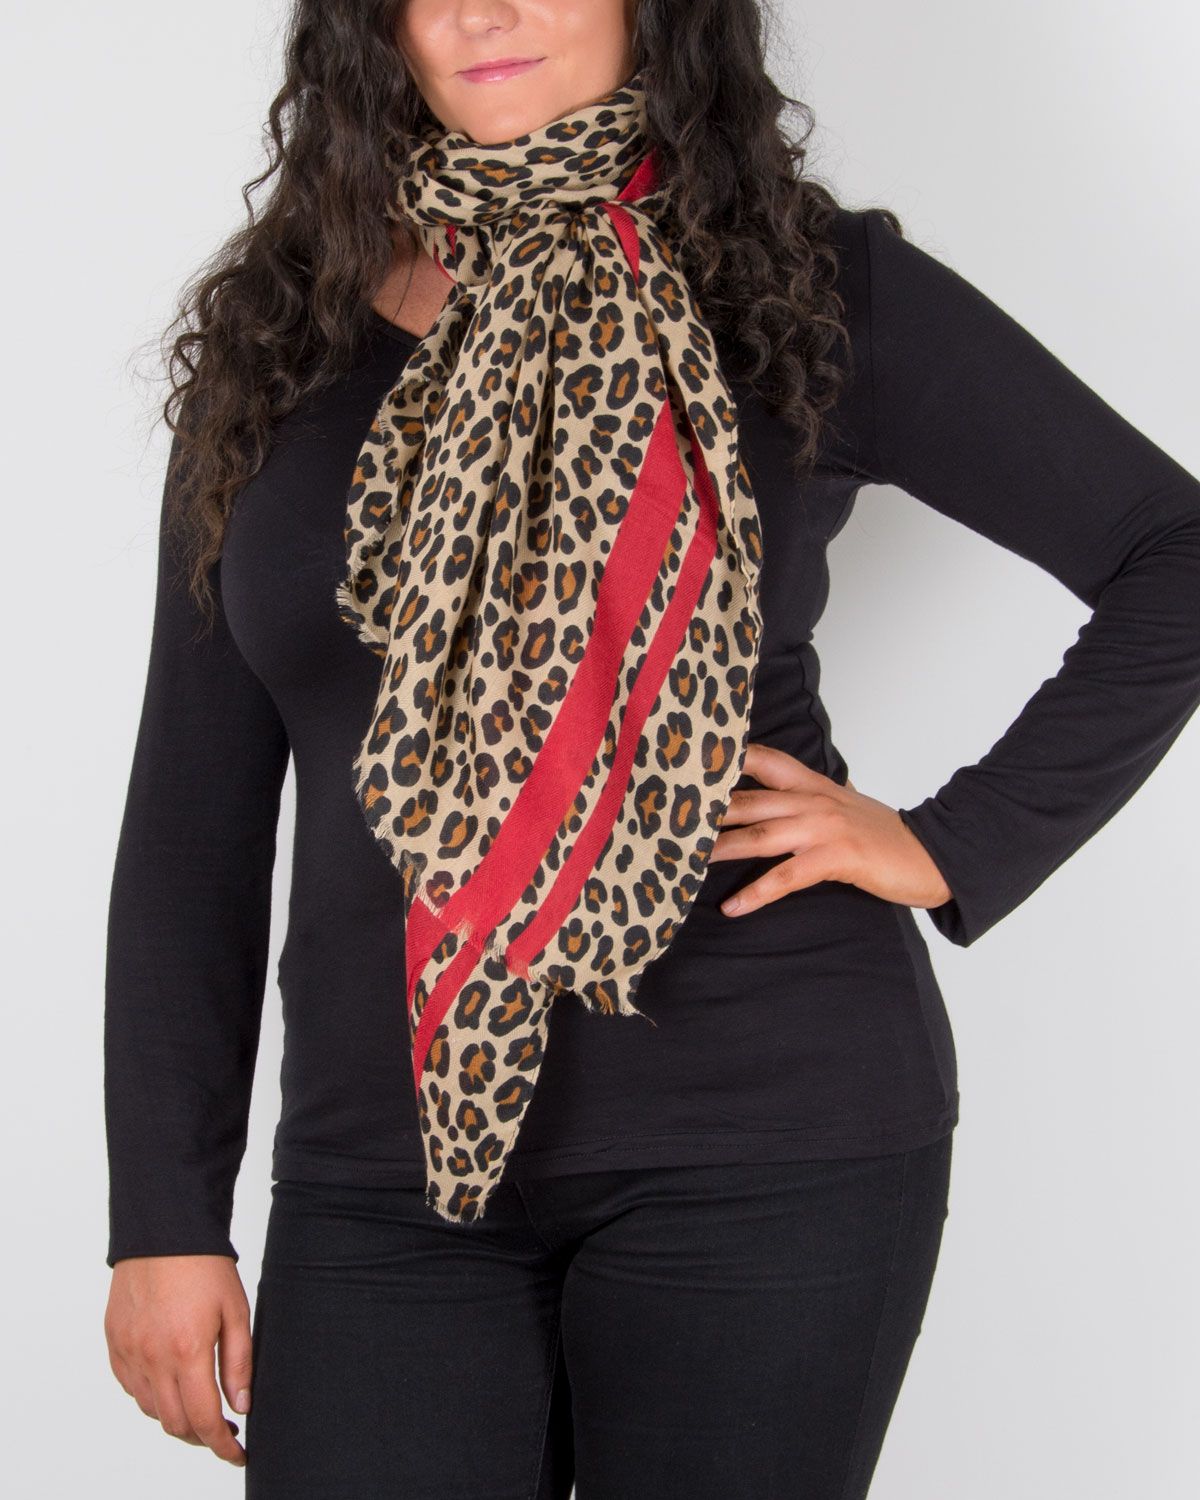 Scarf Room - The No 37 Label Large Leopard Print Scarf b